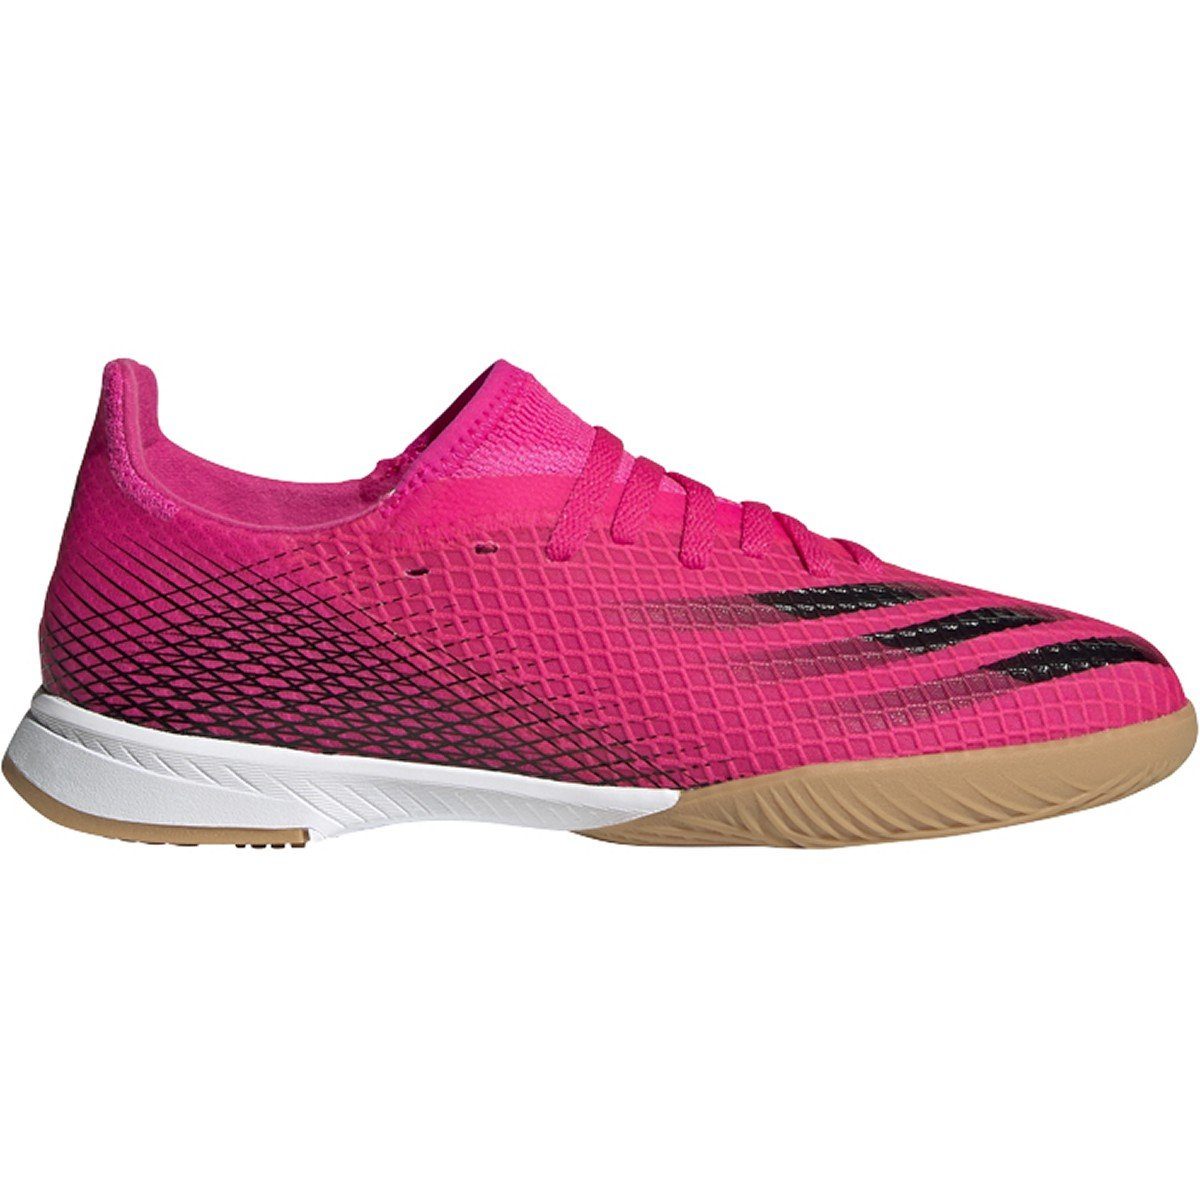 Adidas JR X Ghosted .3 IN - Pink-Black (Side 1)